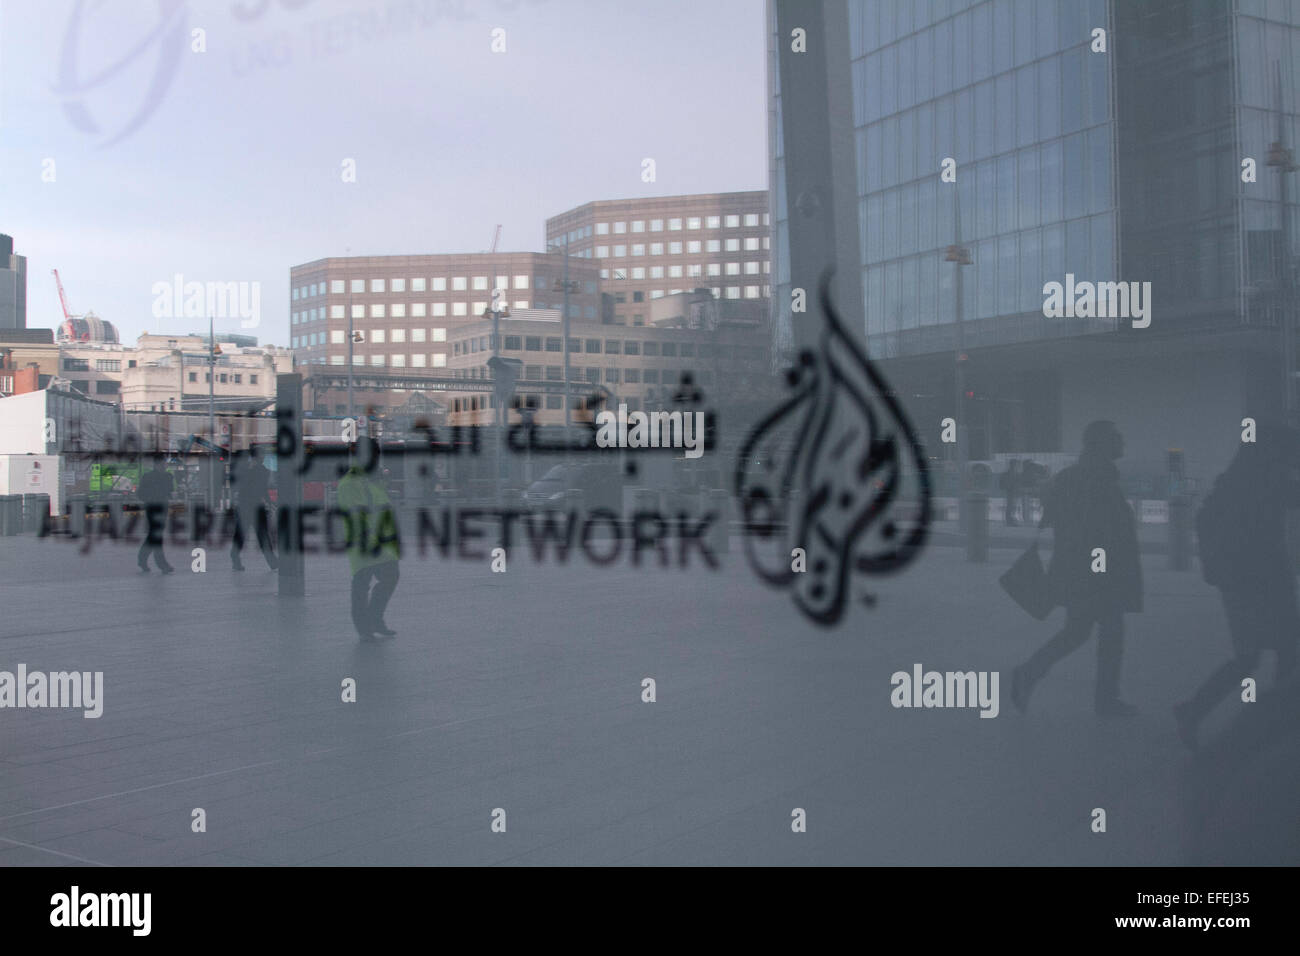 London, UK. 2nd February 2015. Pedestrians reflected on the window of the  broadcasting media office of AlJazeera in London after Al Jazeera journalist Peter Greste was freed and deported from Egypt. Credit:  amer ghazzal/Alamy Live News Stock Photo